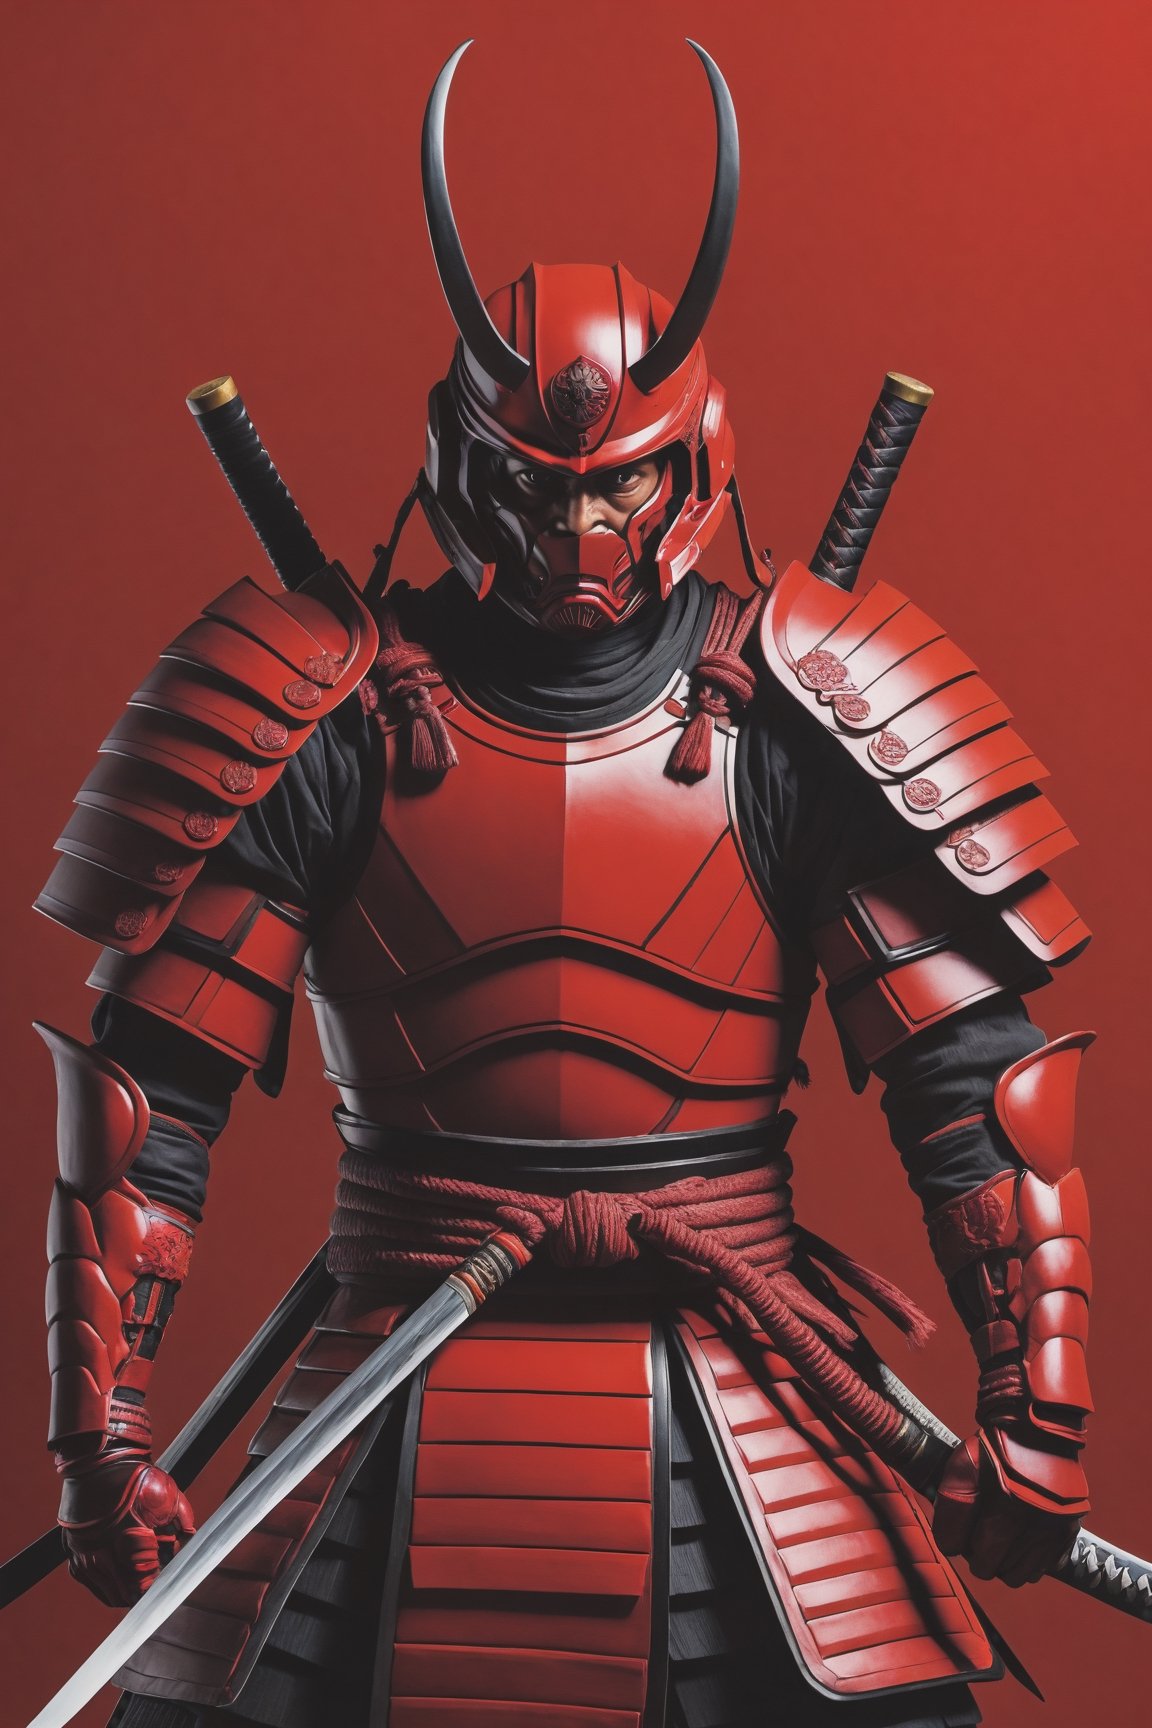 Utlrawide shot Photo realistic image a red samurai with strong body looking like a red hornet, contrasting background,photo r3al